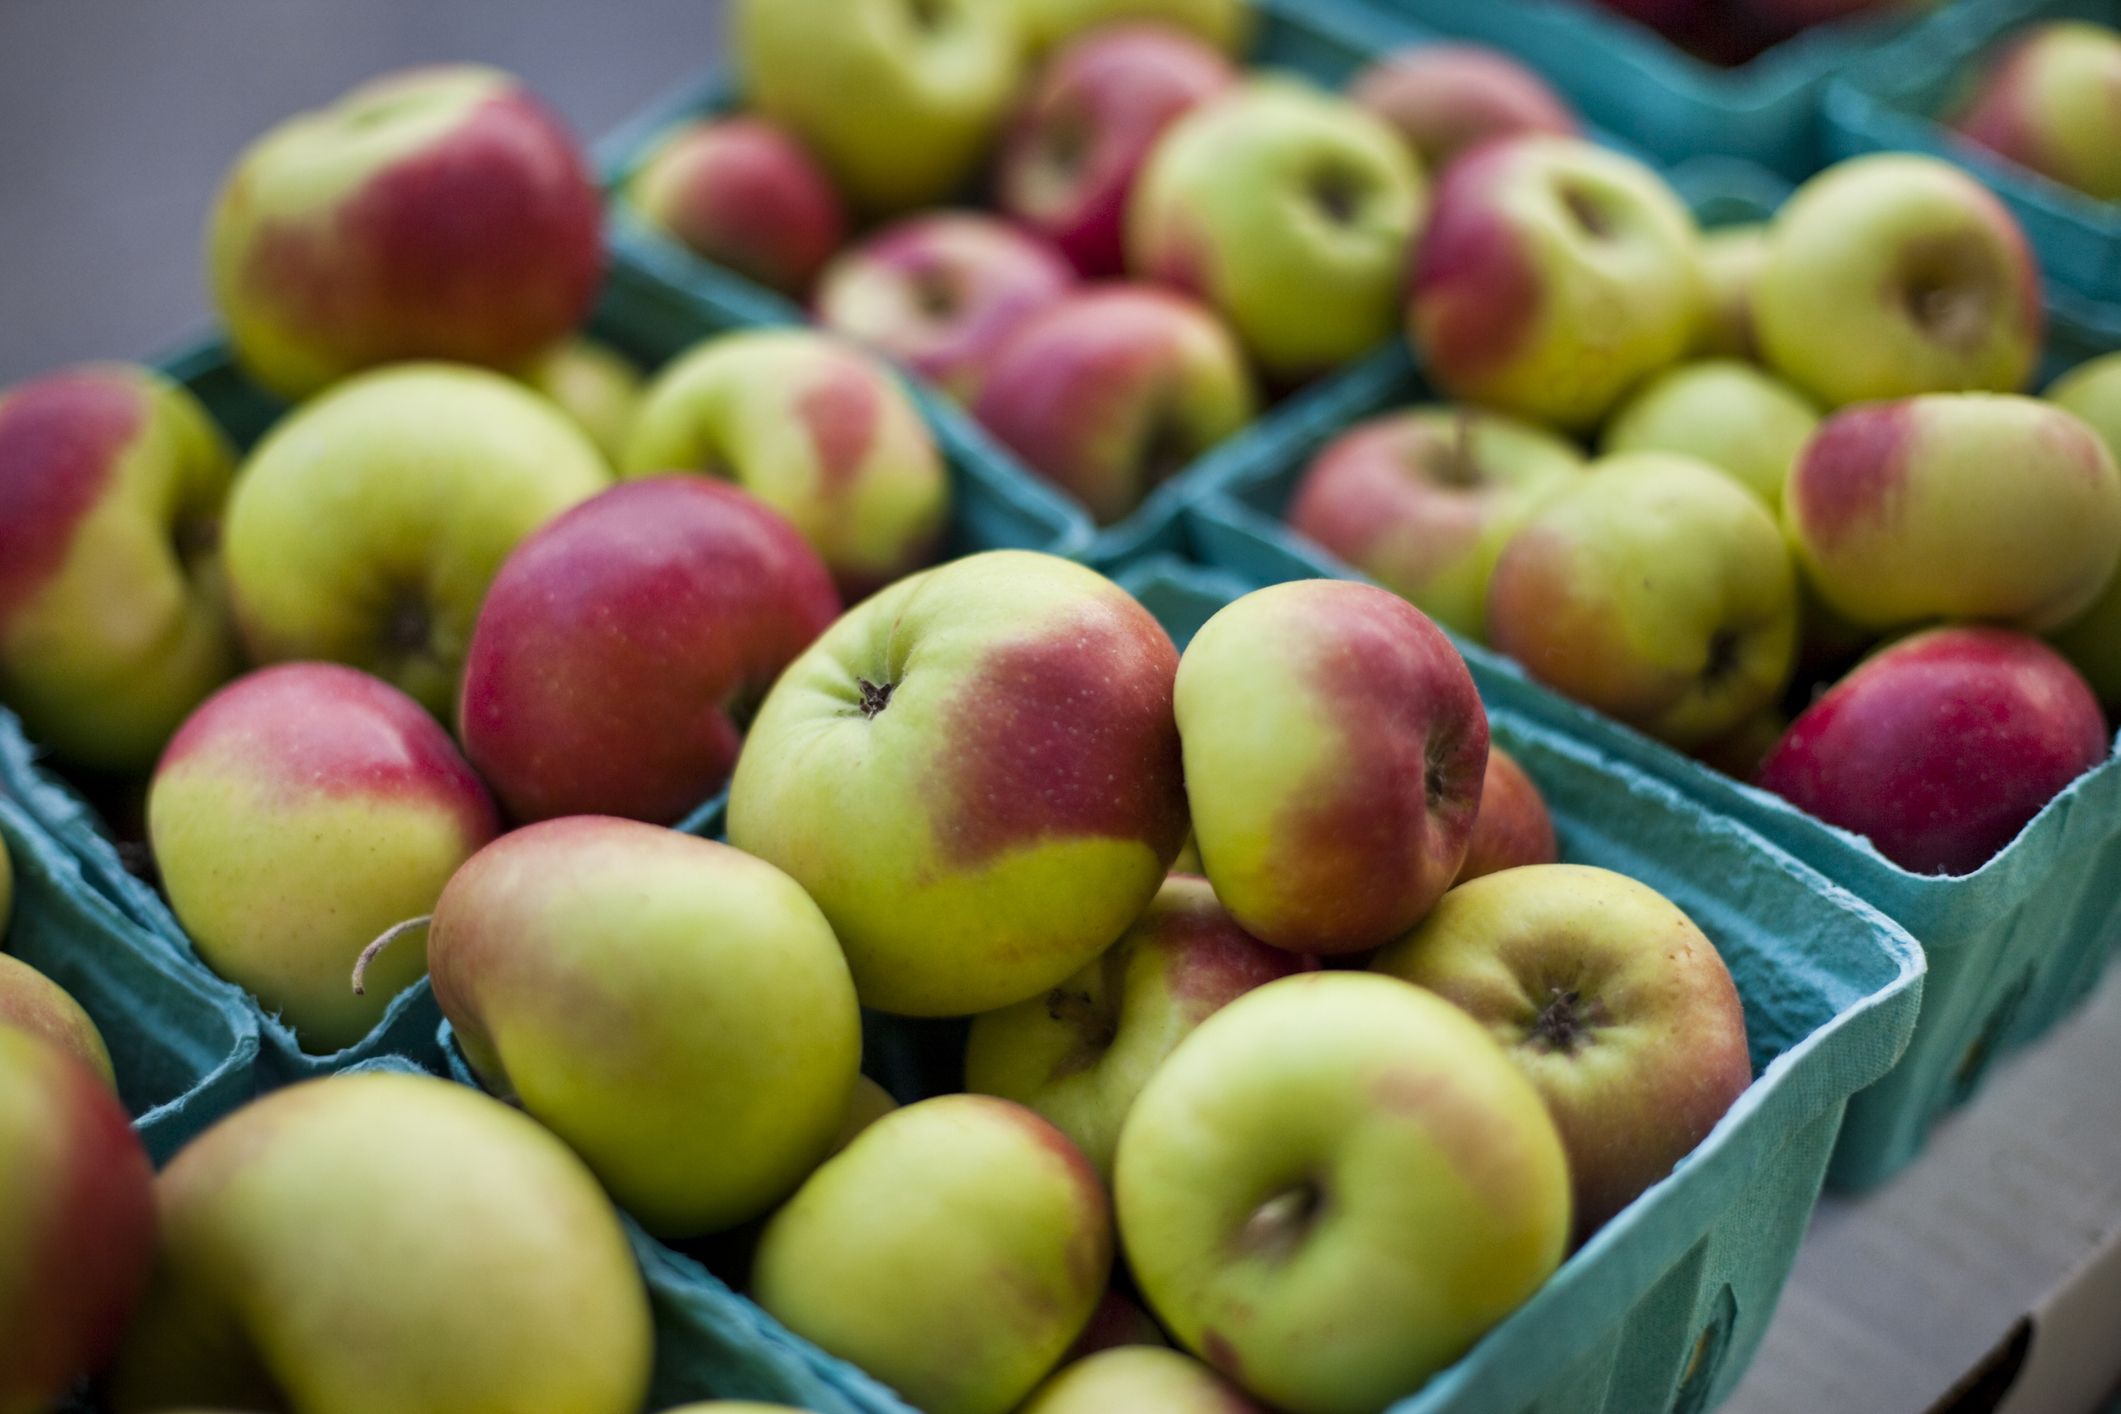 https://hips.hearstapps.com/hmg-prod/images/lady-apples-at-organic-farmers-market-royalty-free-image-1627315148.jpg